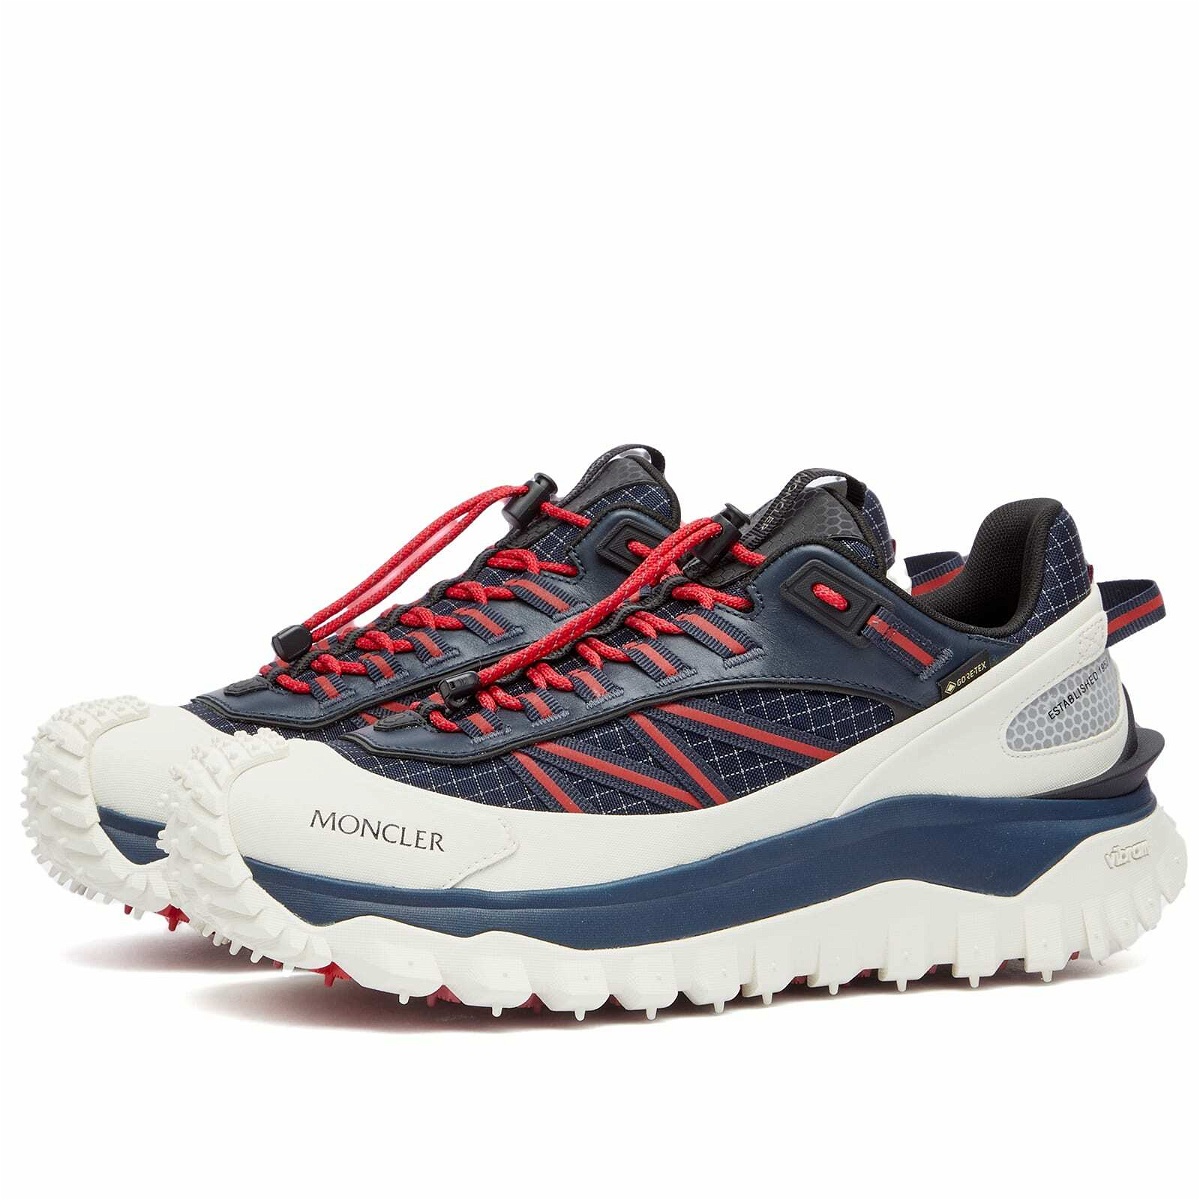 Photo: Moncler Men's Trailgrip GTX Low Top Sneakers in Black/White/Red